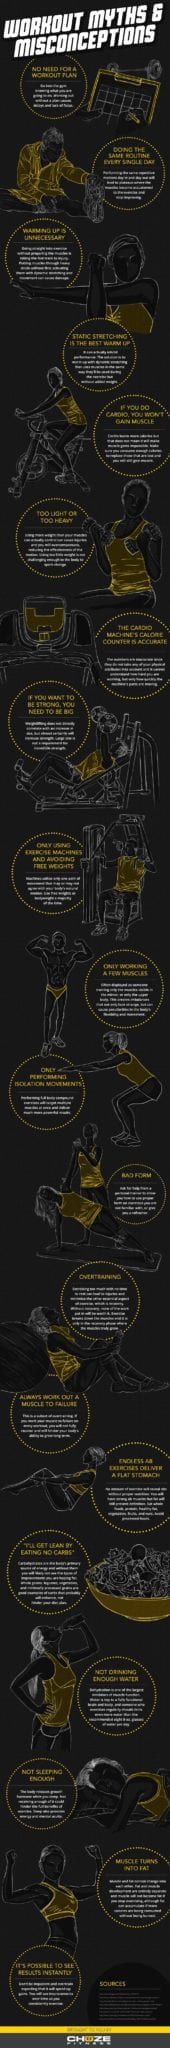 Exercise Myths & Misconceptions - an Infographic